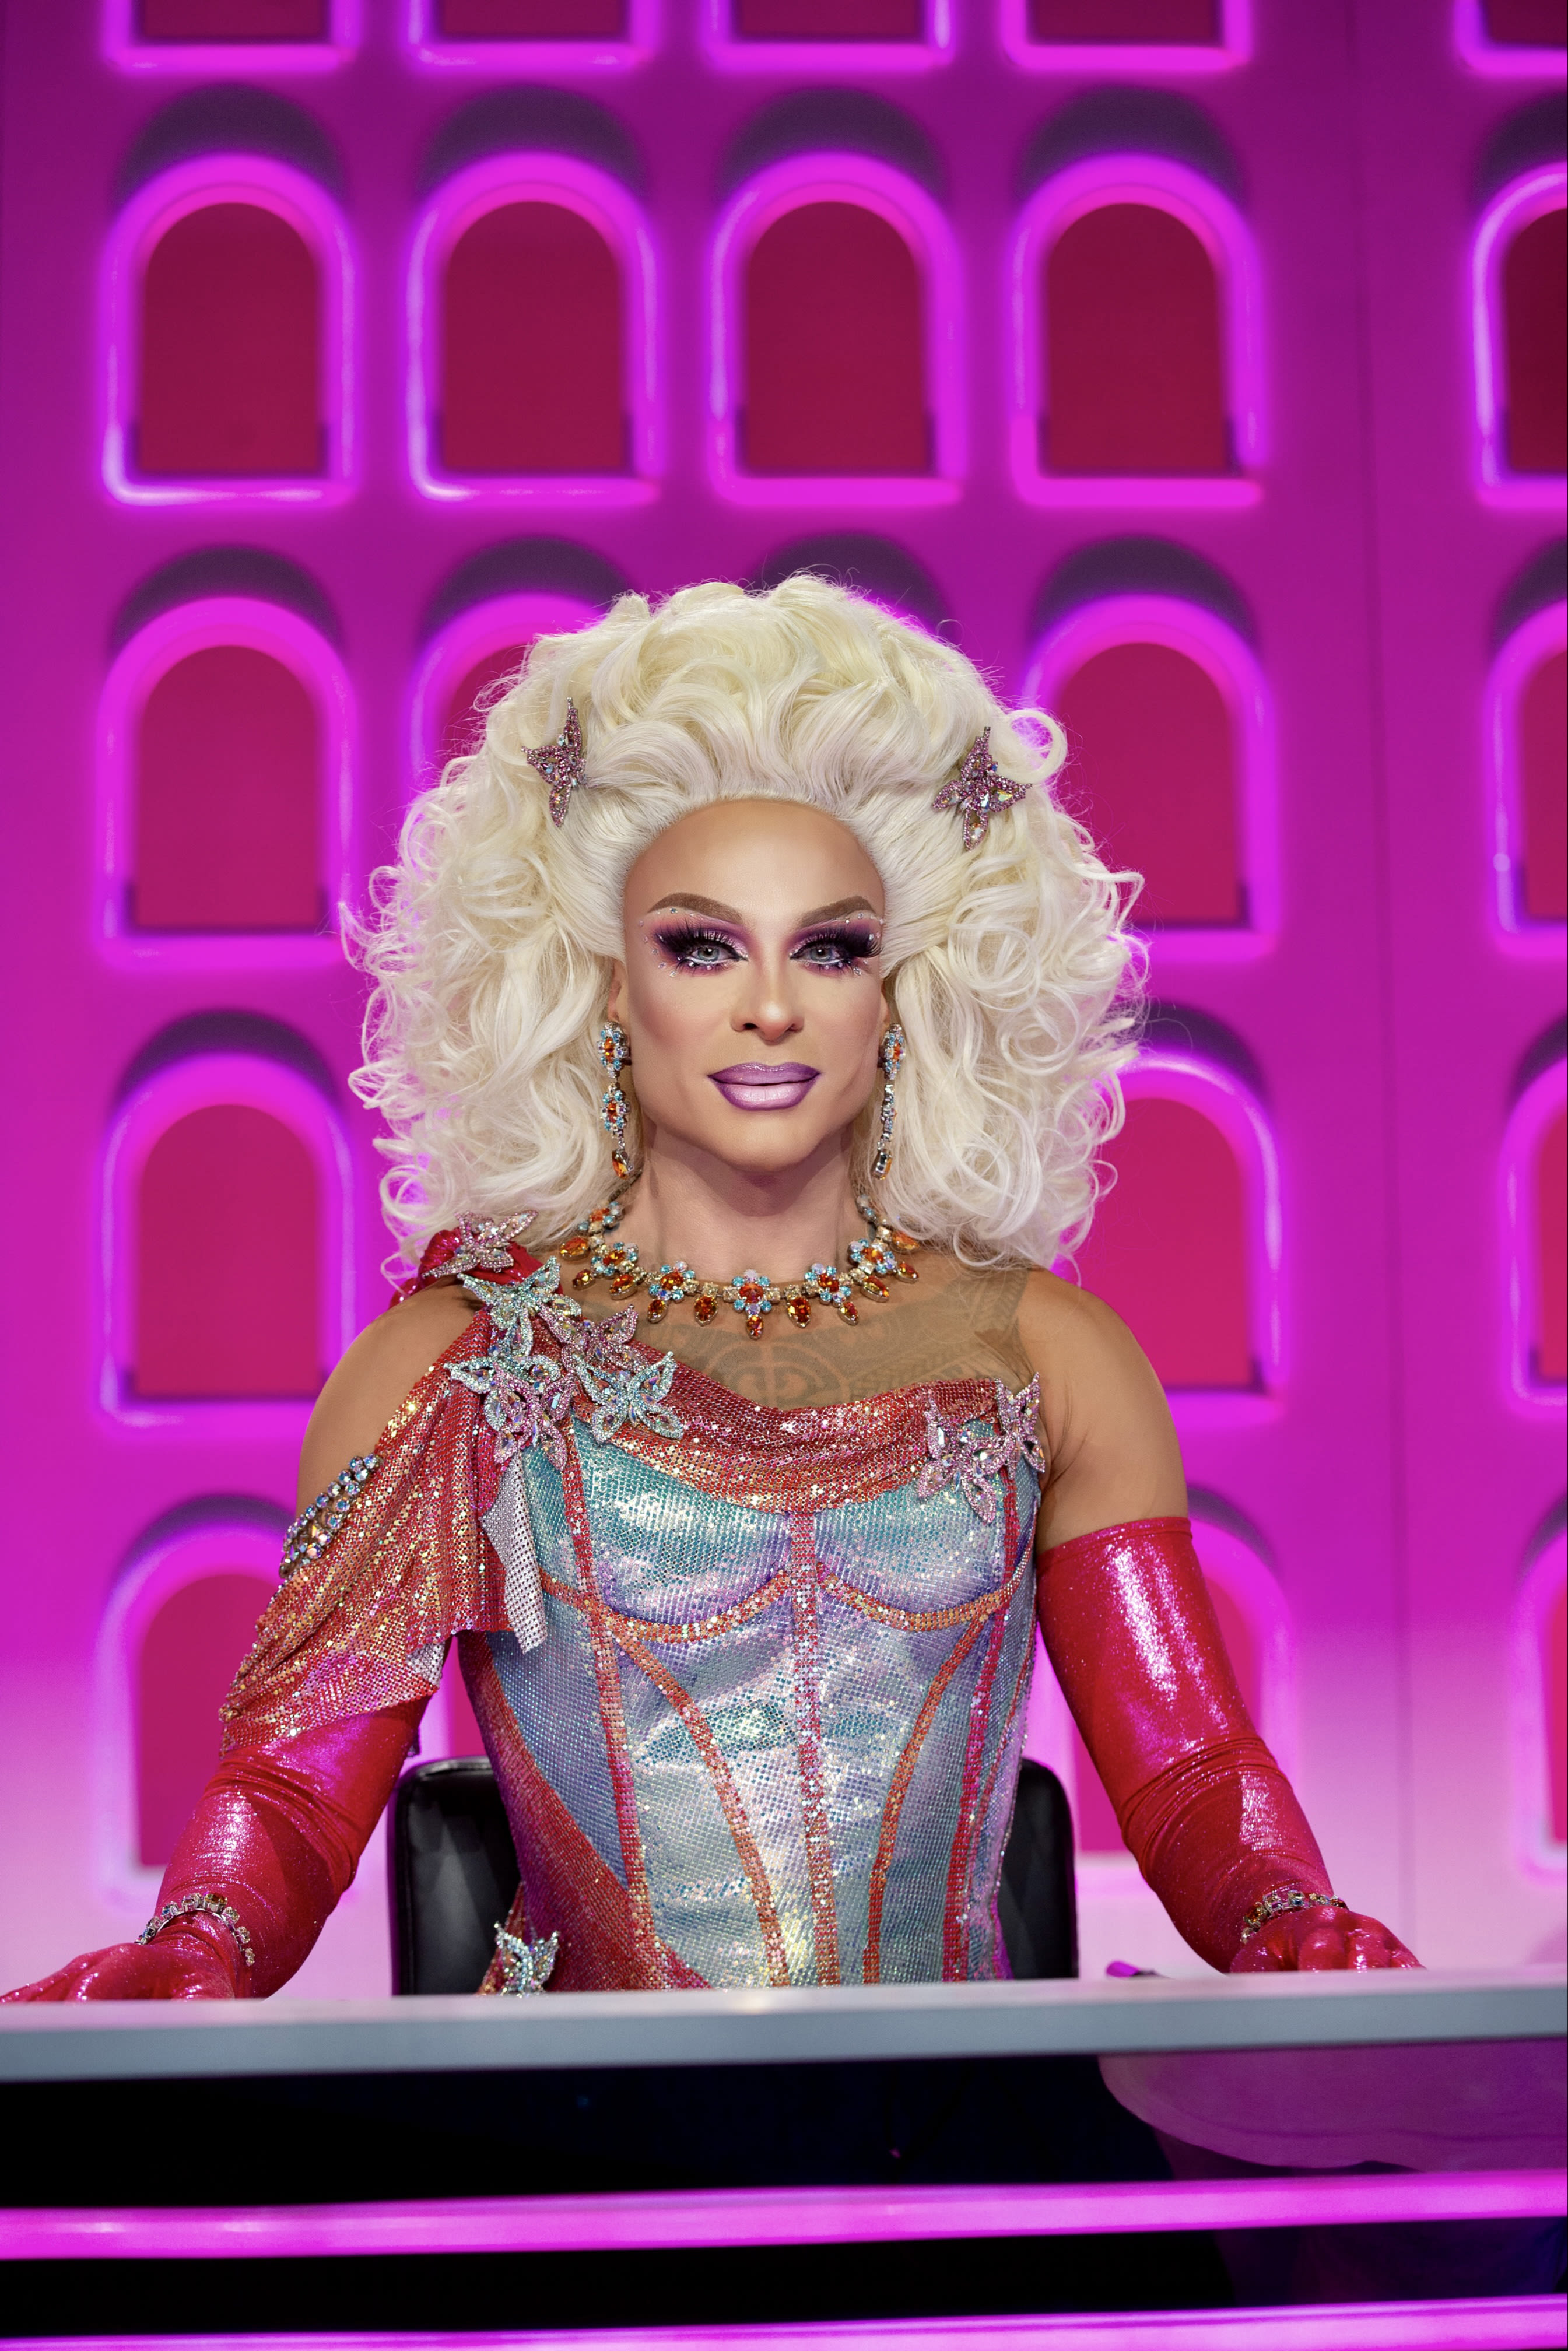 6 'Drag Race' hosts on an Olympic opportunity, a global 'All Stars' season and more